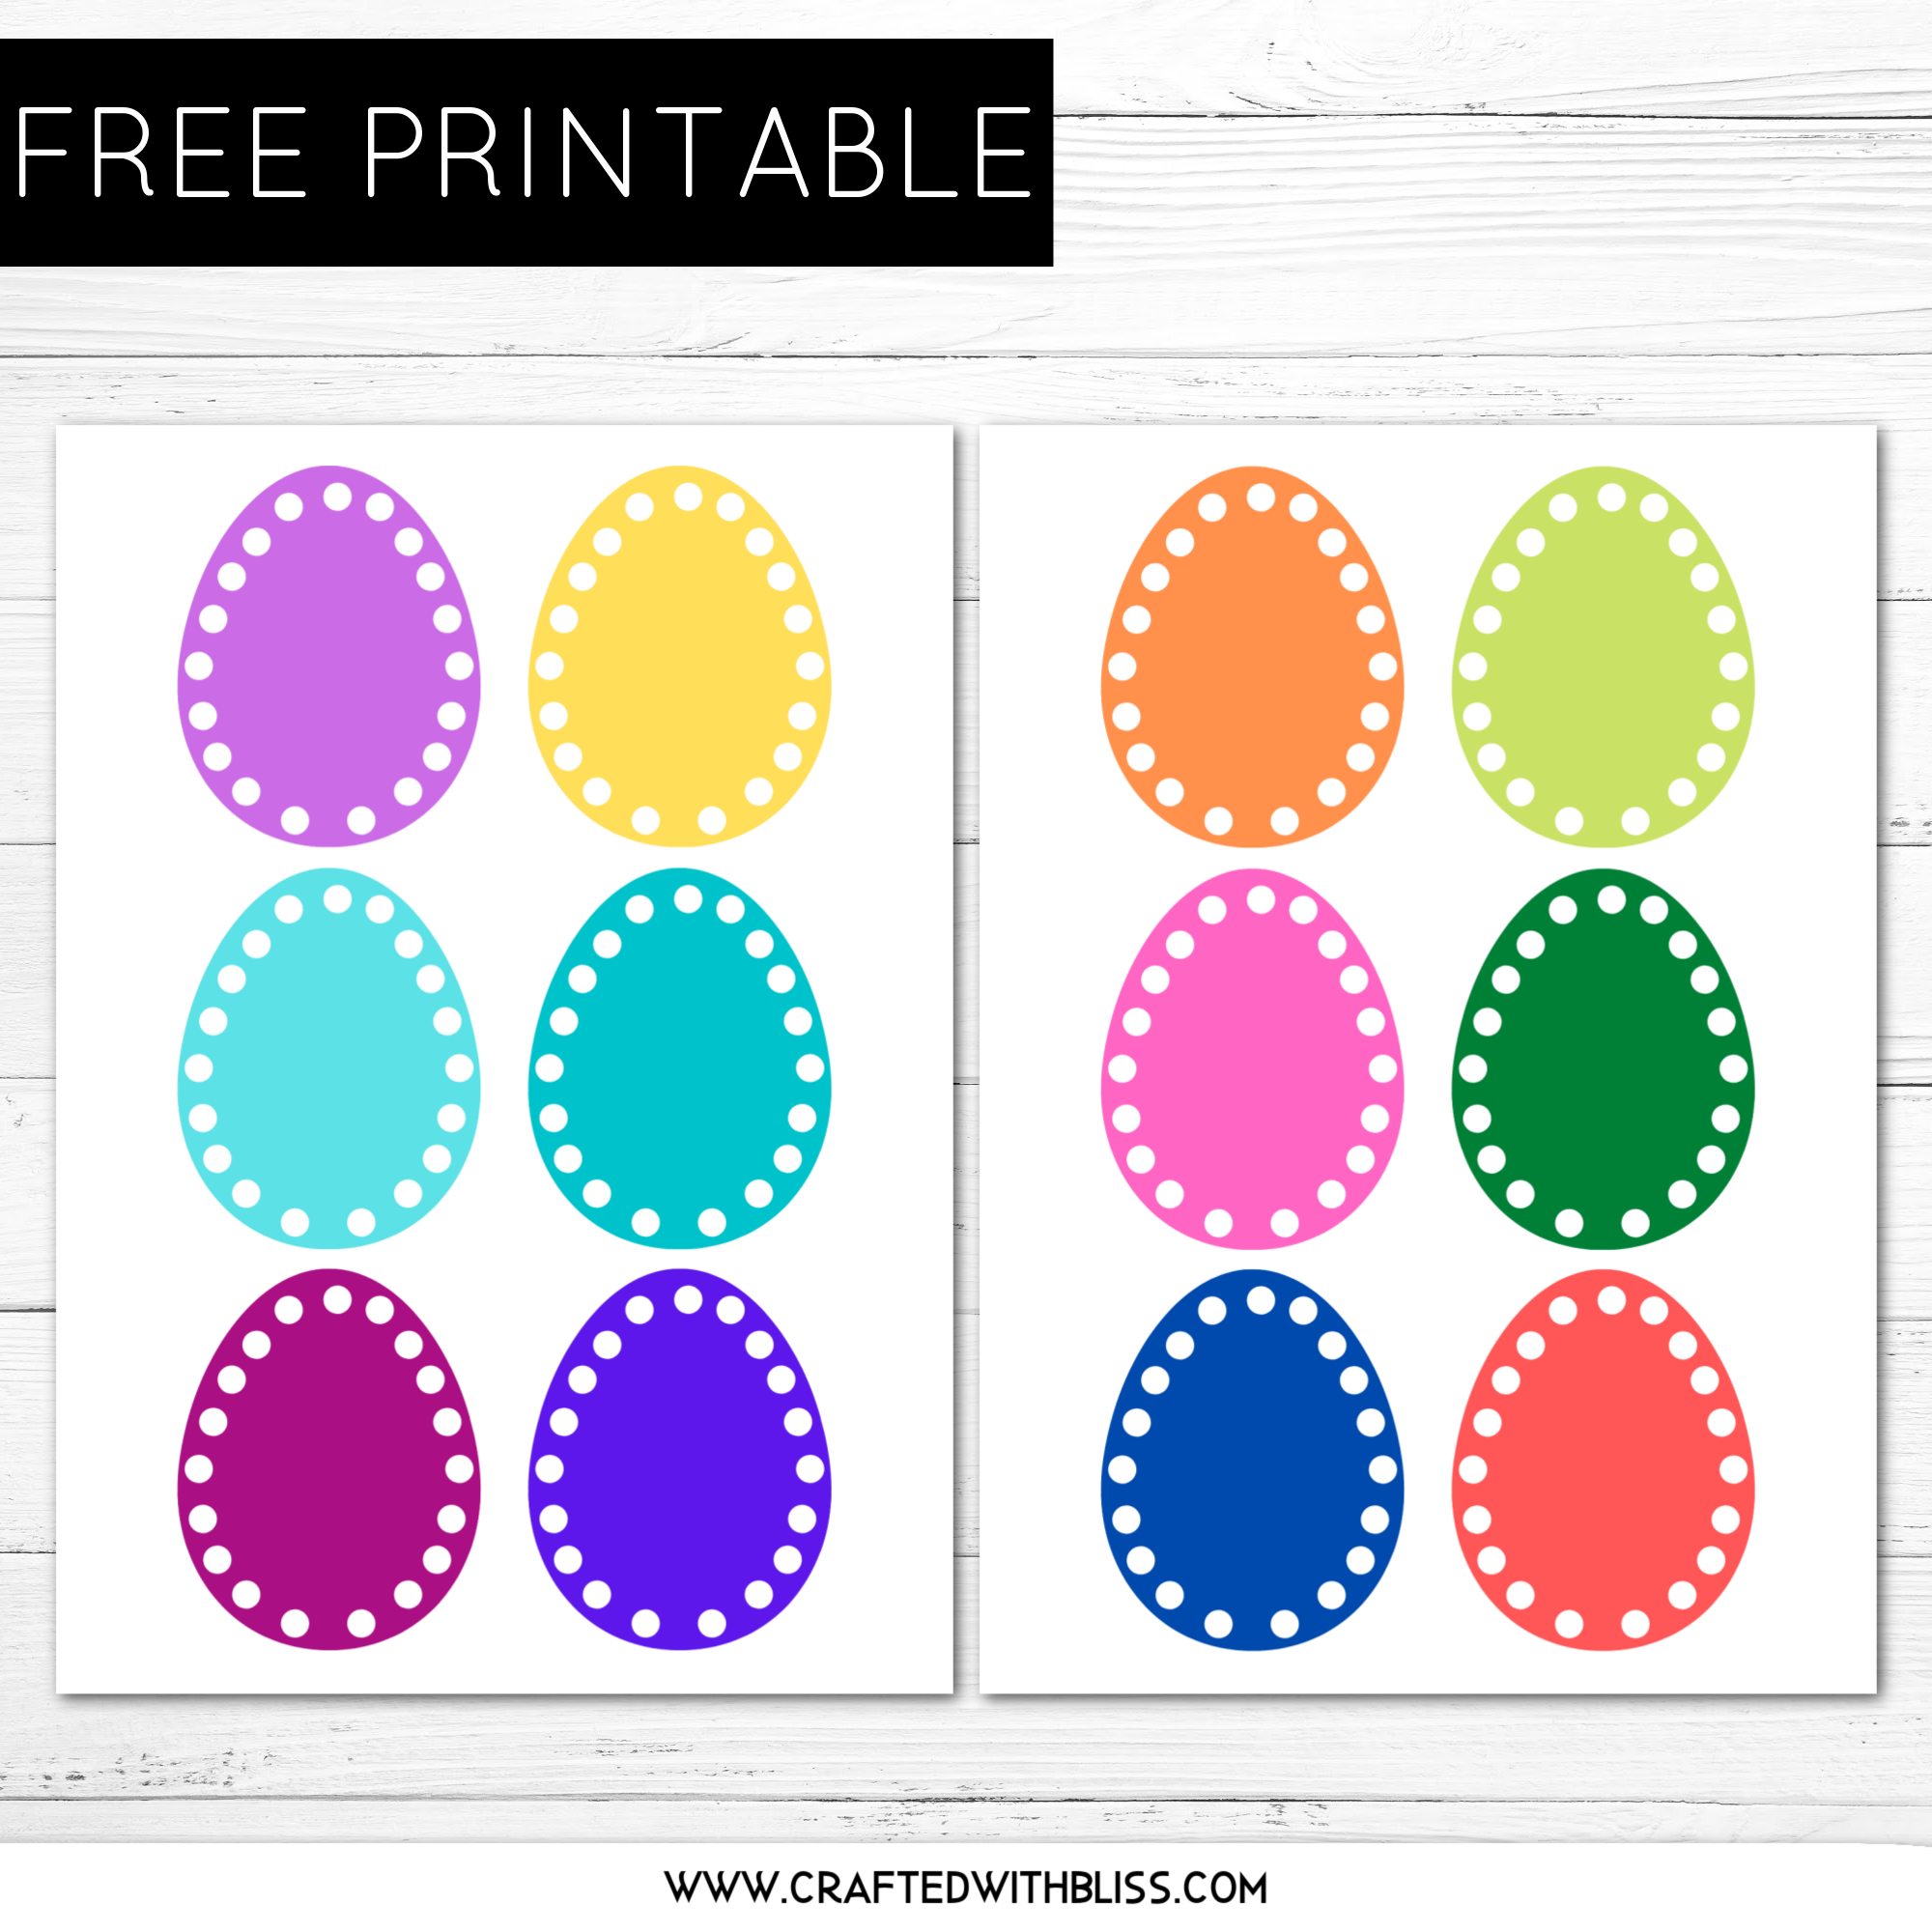 free-printable-hole-punch-activities-free-printable-templates